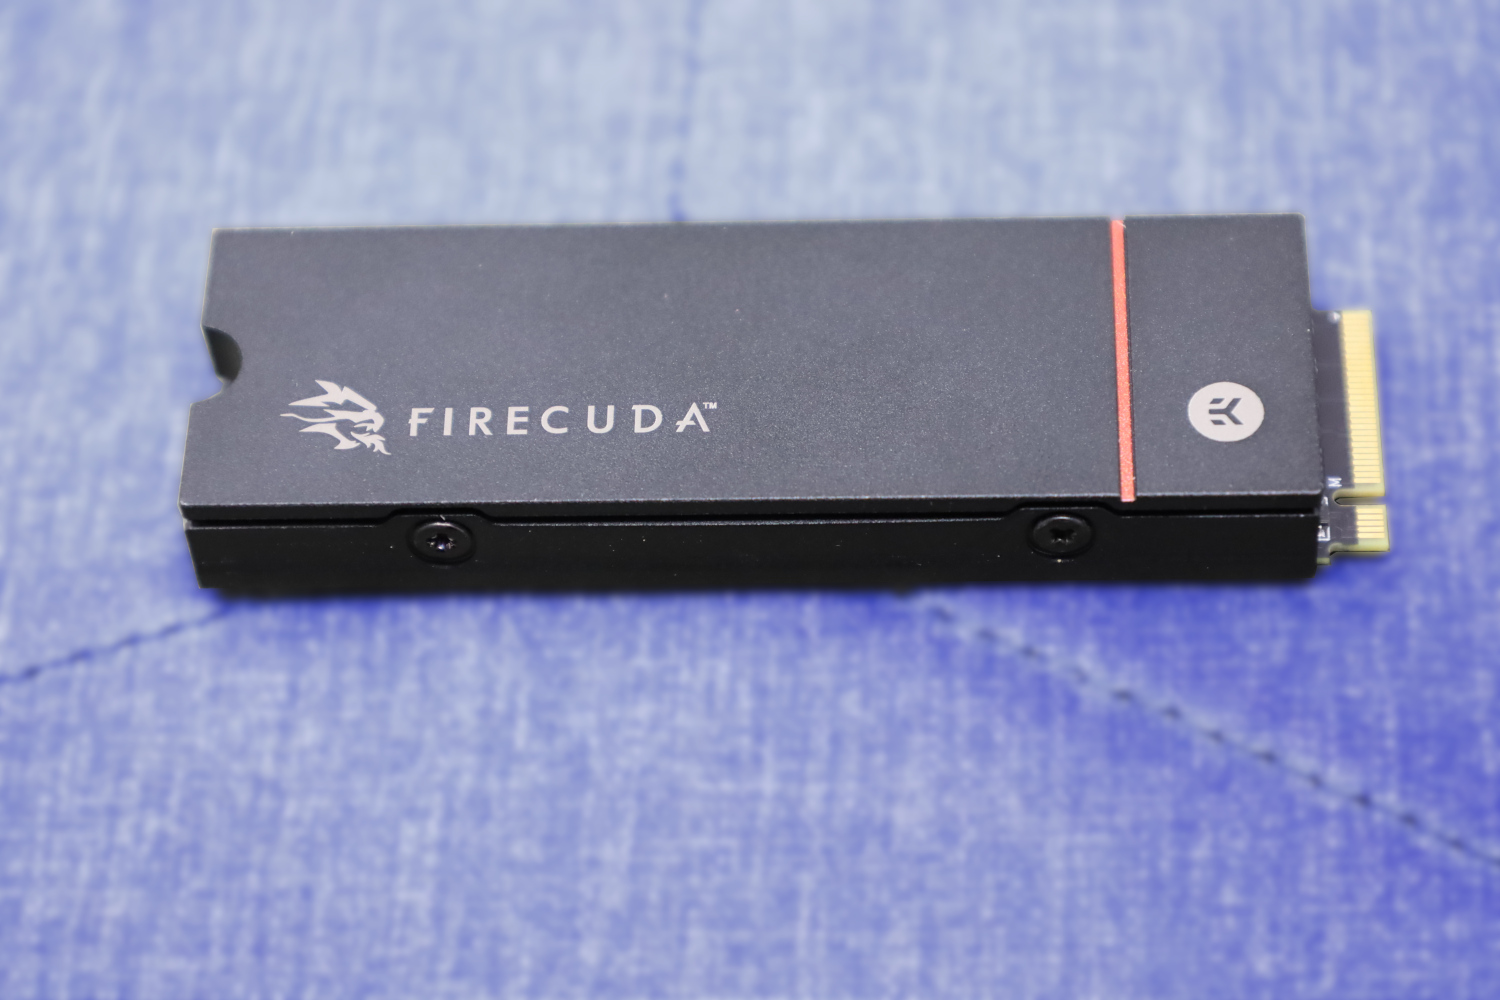 Disque SSD Seagate FireCuda 520 1 To NVMe M.2 PCIe Gen4 ×4 NVMe